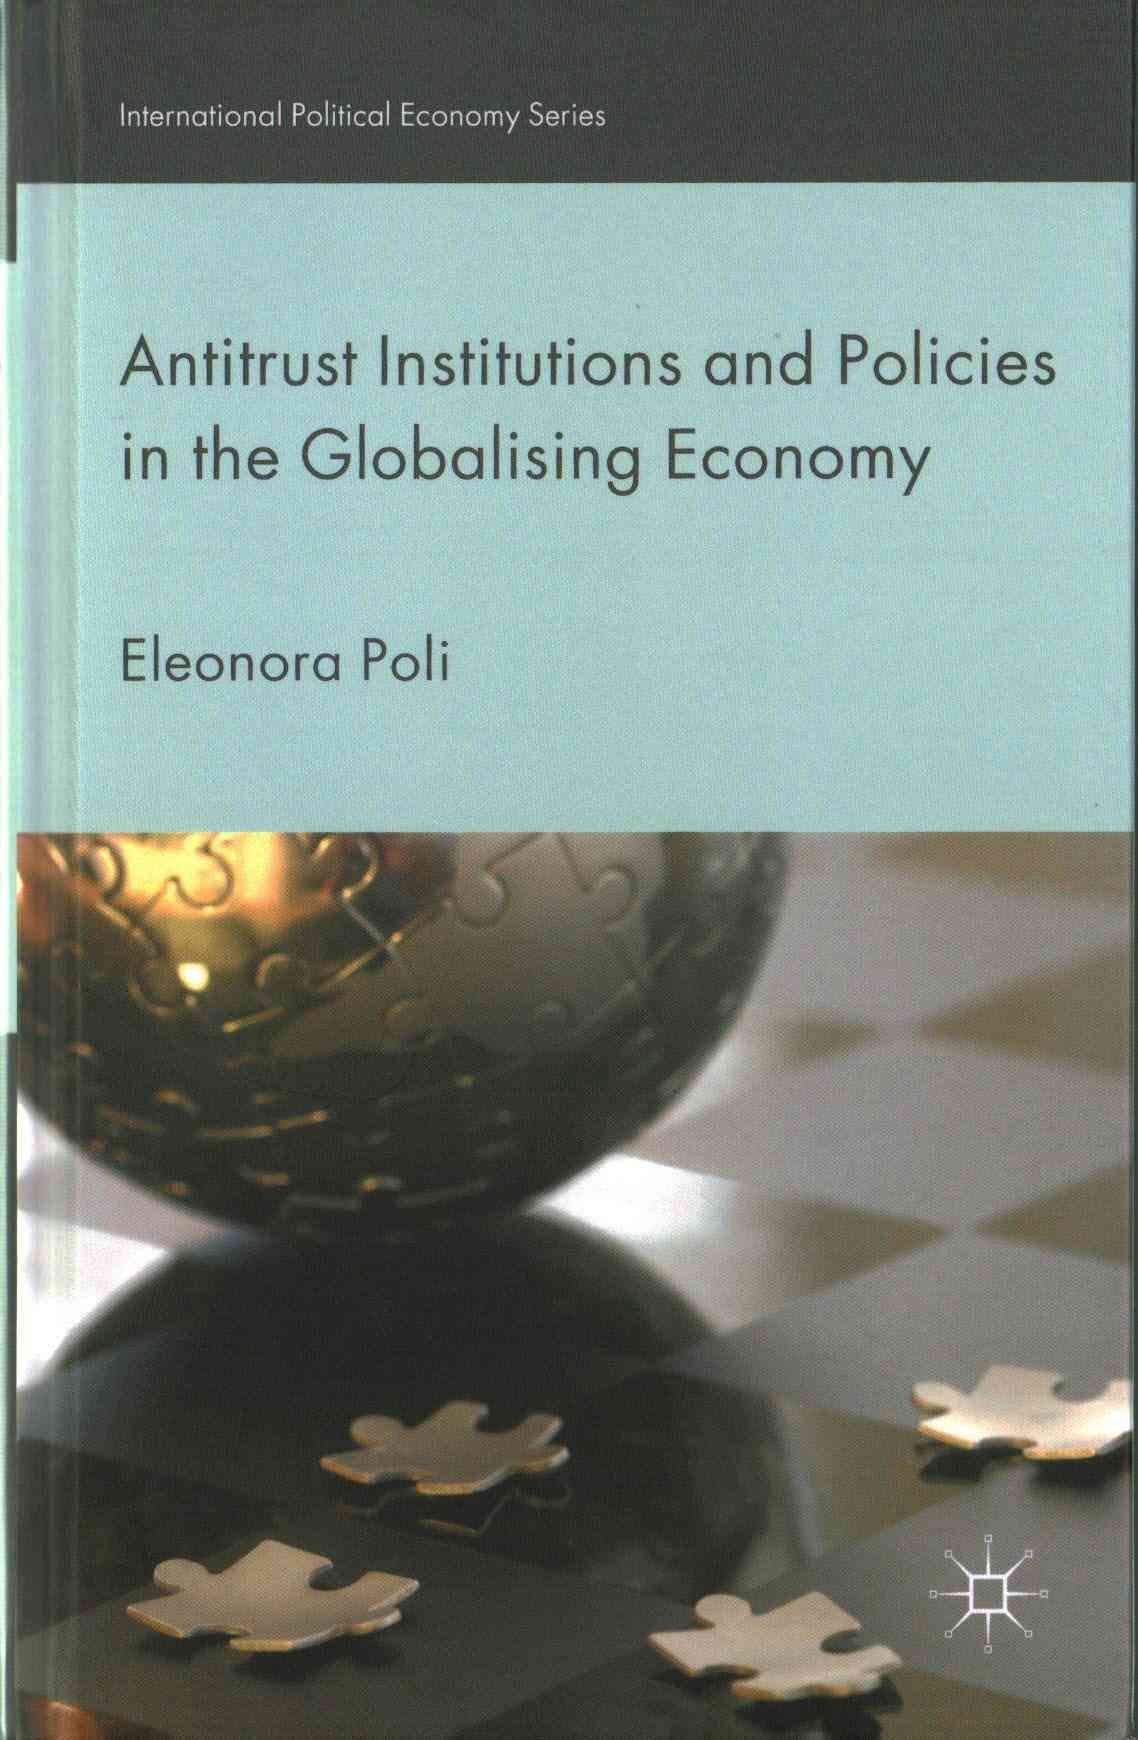 Antitrust Institutions and Policies in the Globalising Economy